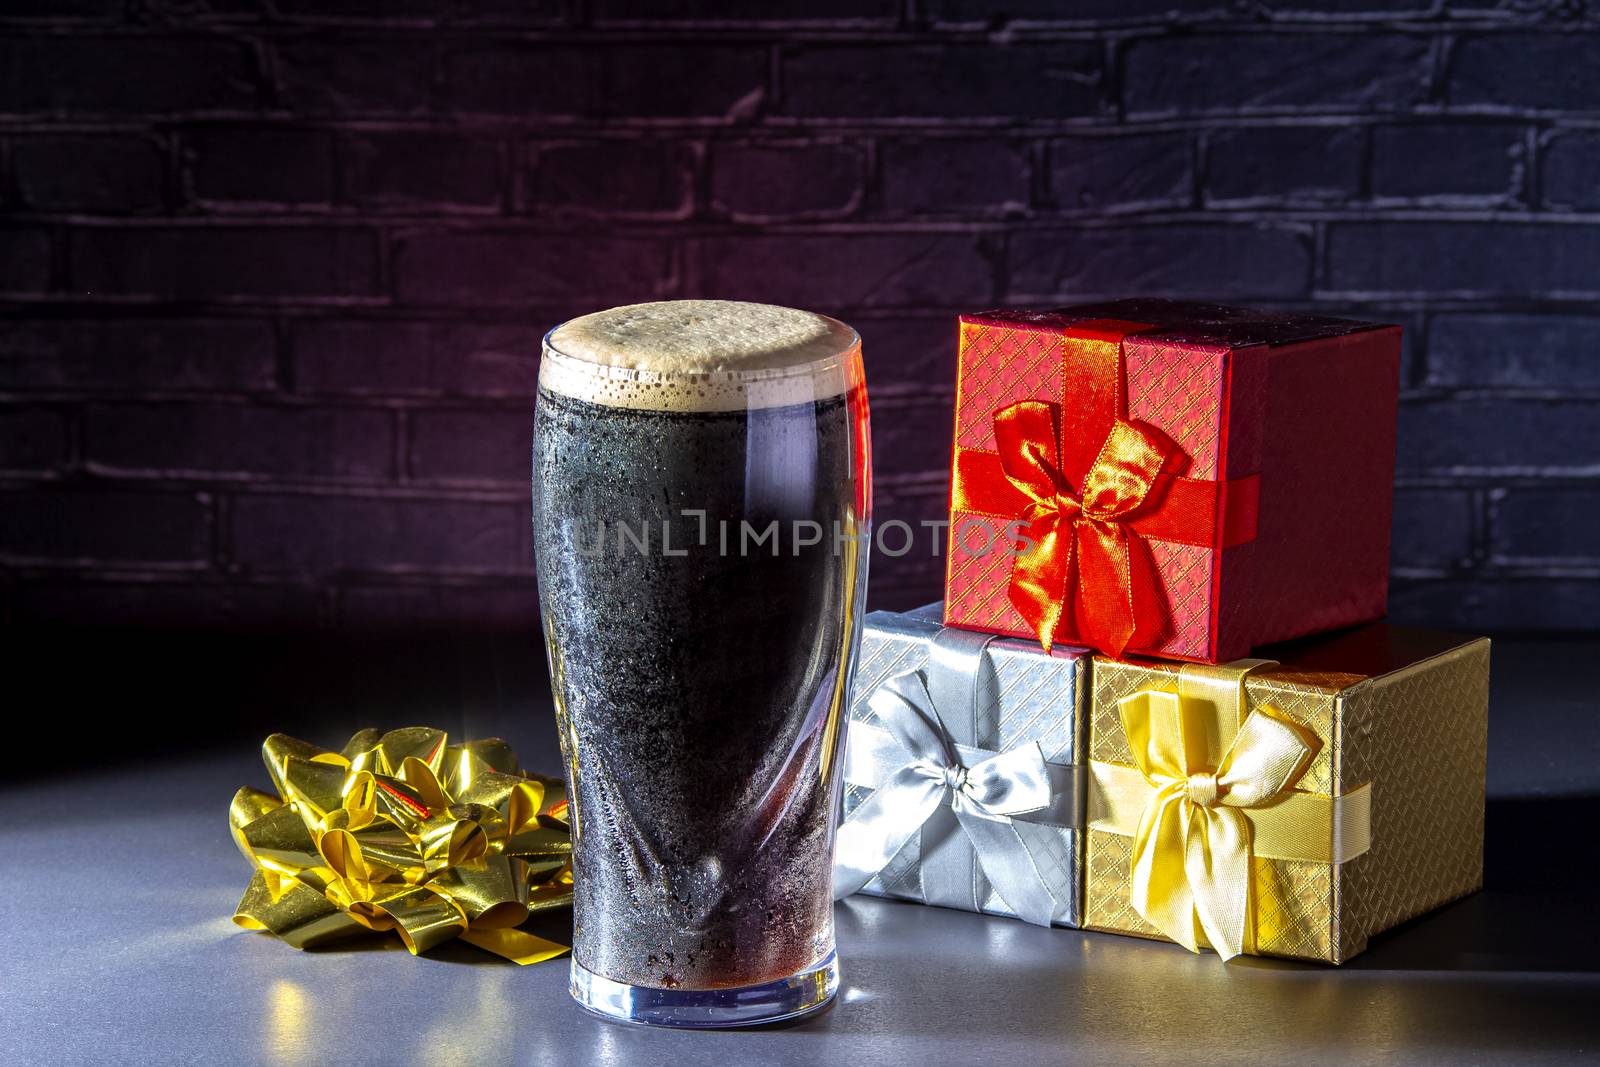 A dark Irish dry stout beer glass with a gift boxes